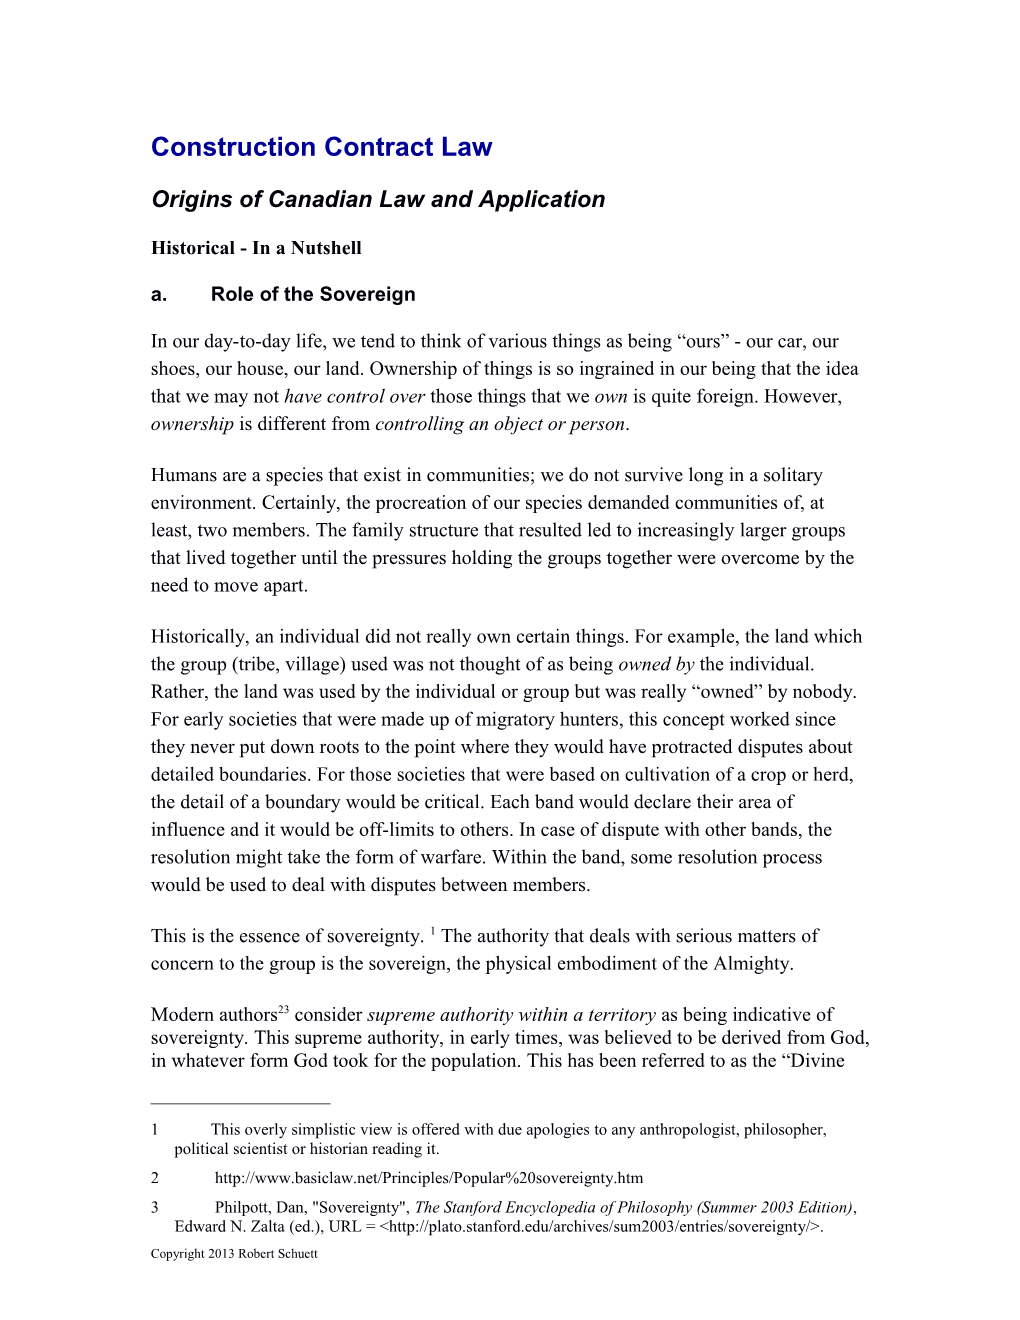 Origins of Canadian Law and Application